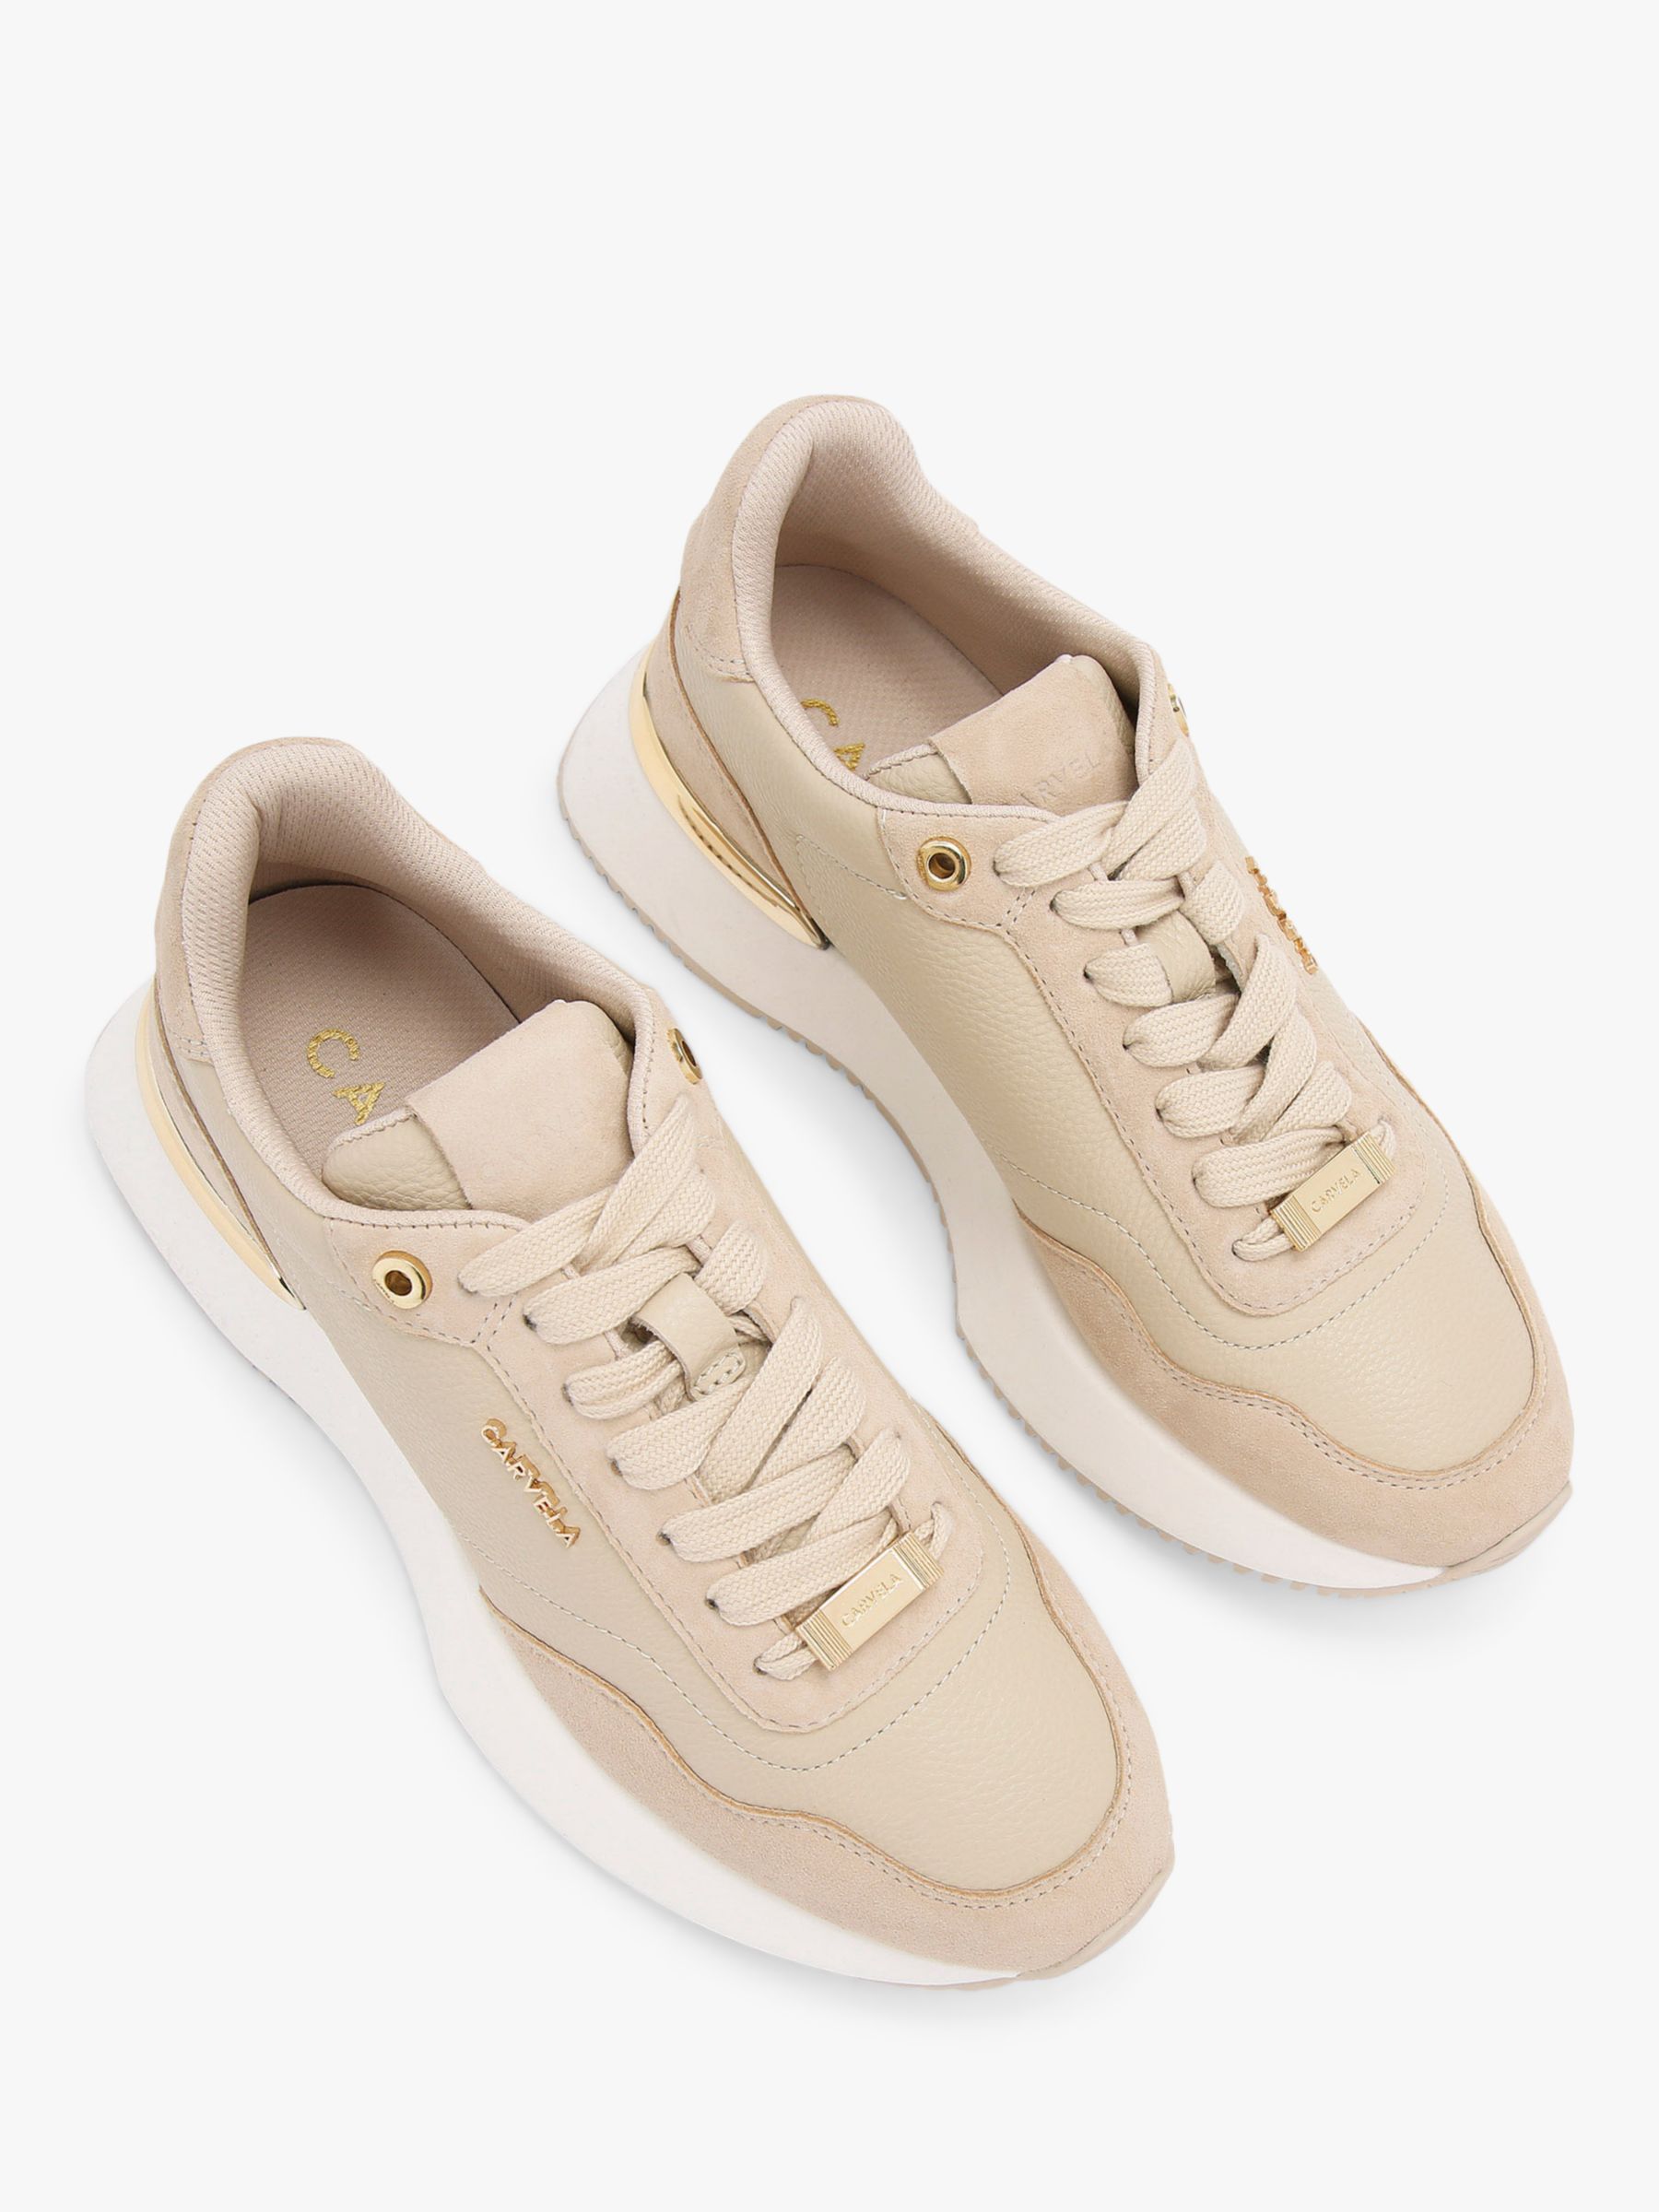 Carvela Flare Leather Trainers, Natural Beige, 3